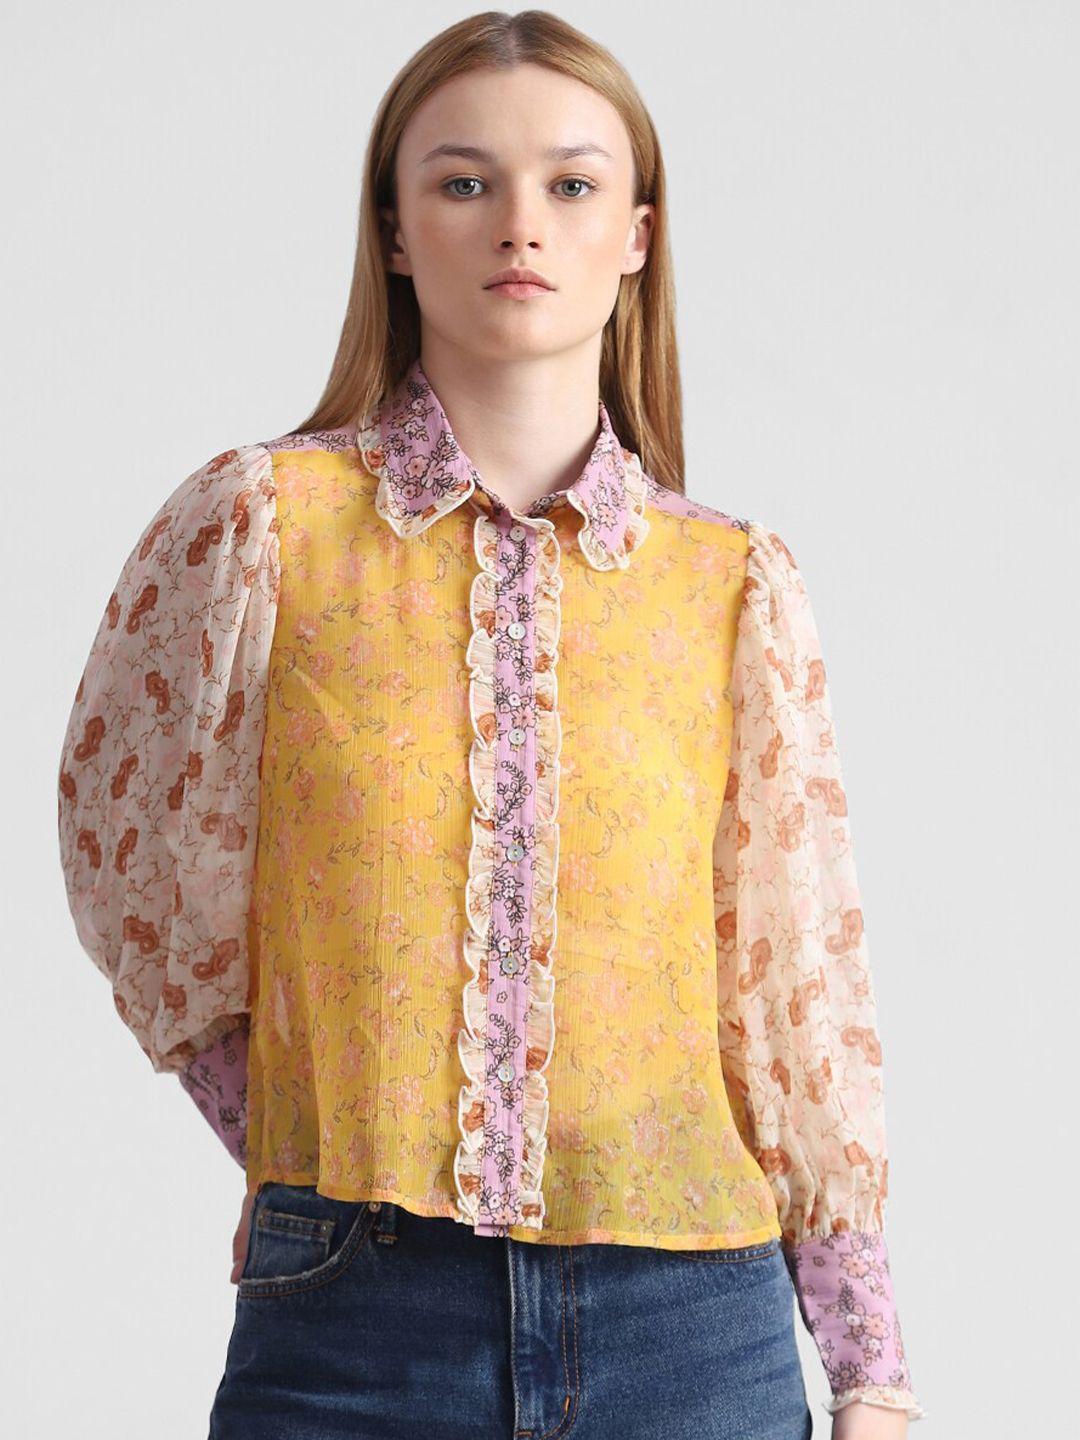 ONLY Women Floral Printed Semi Sheer Casual Shirt